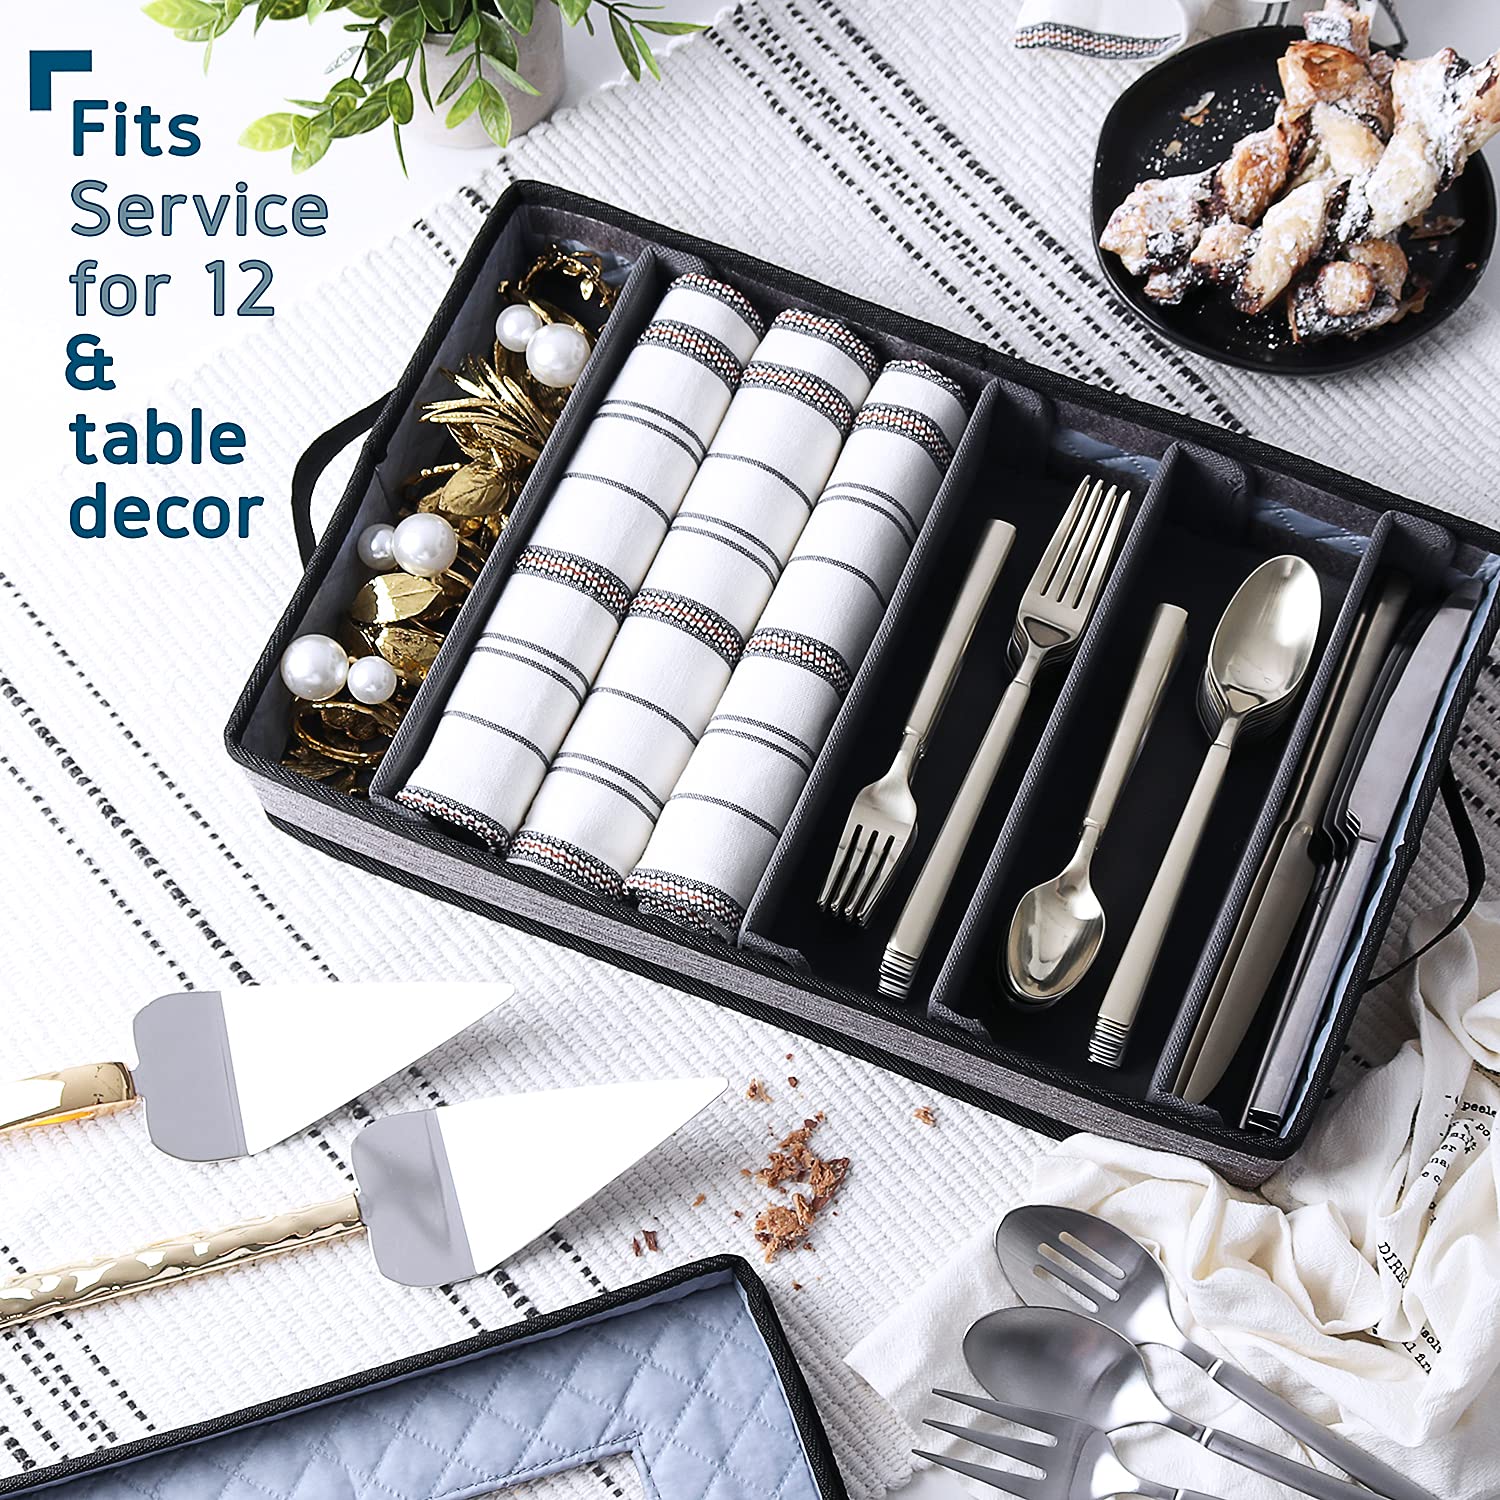 Flatware & Utensil Storage - Durable Silverware Storage Box with Padded Dividers, 5 Compartment Flatware Storage Case, Silverware Case with Handles and Removable Lid - Protects and Organizes Cutlery